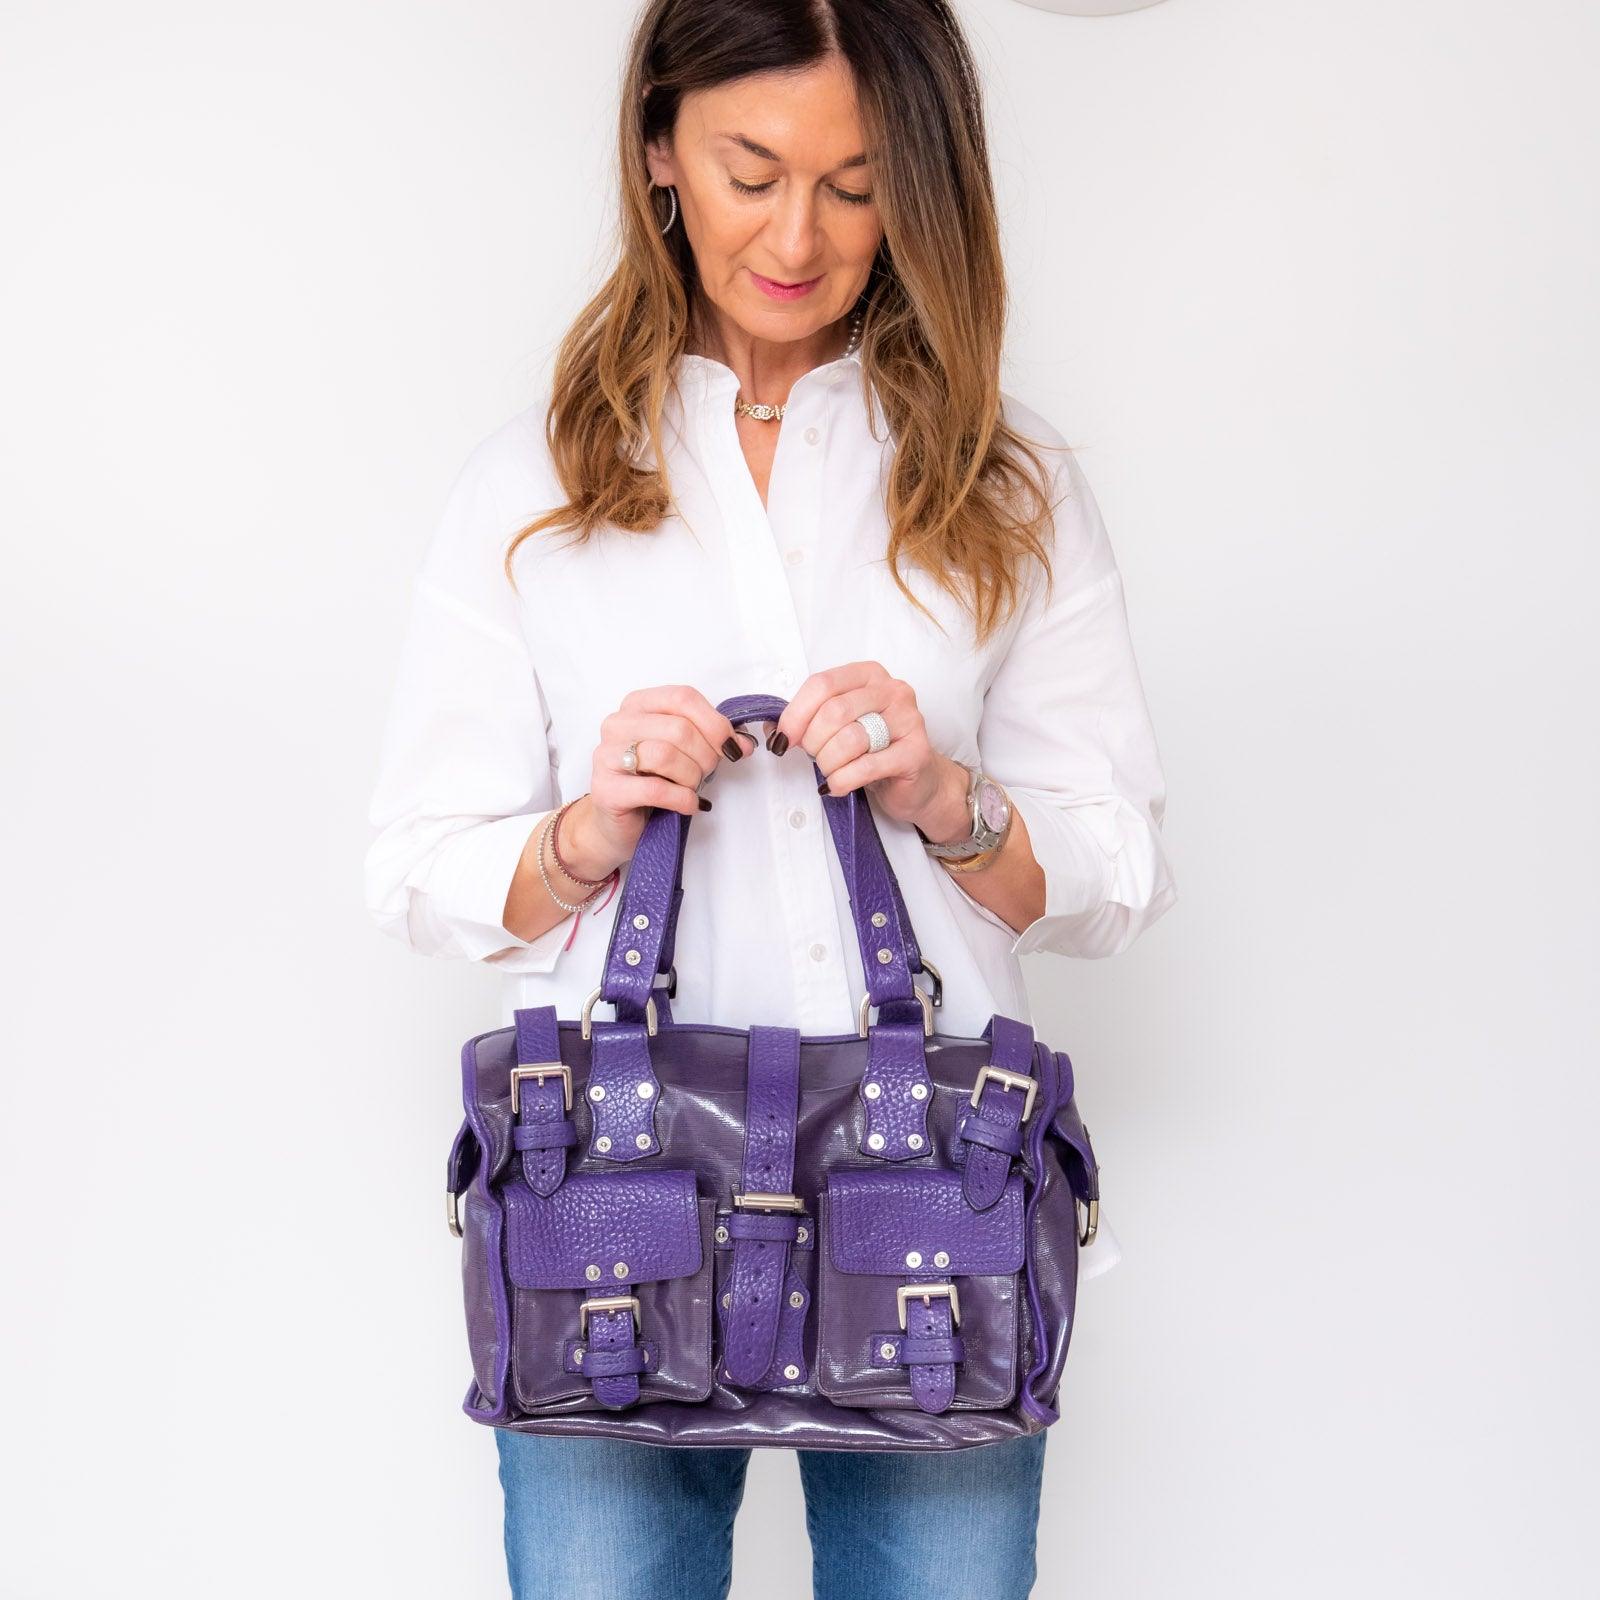 Mulberry Roxanne Purple Bag - Image 6 of 7